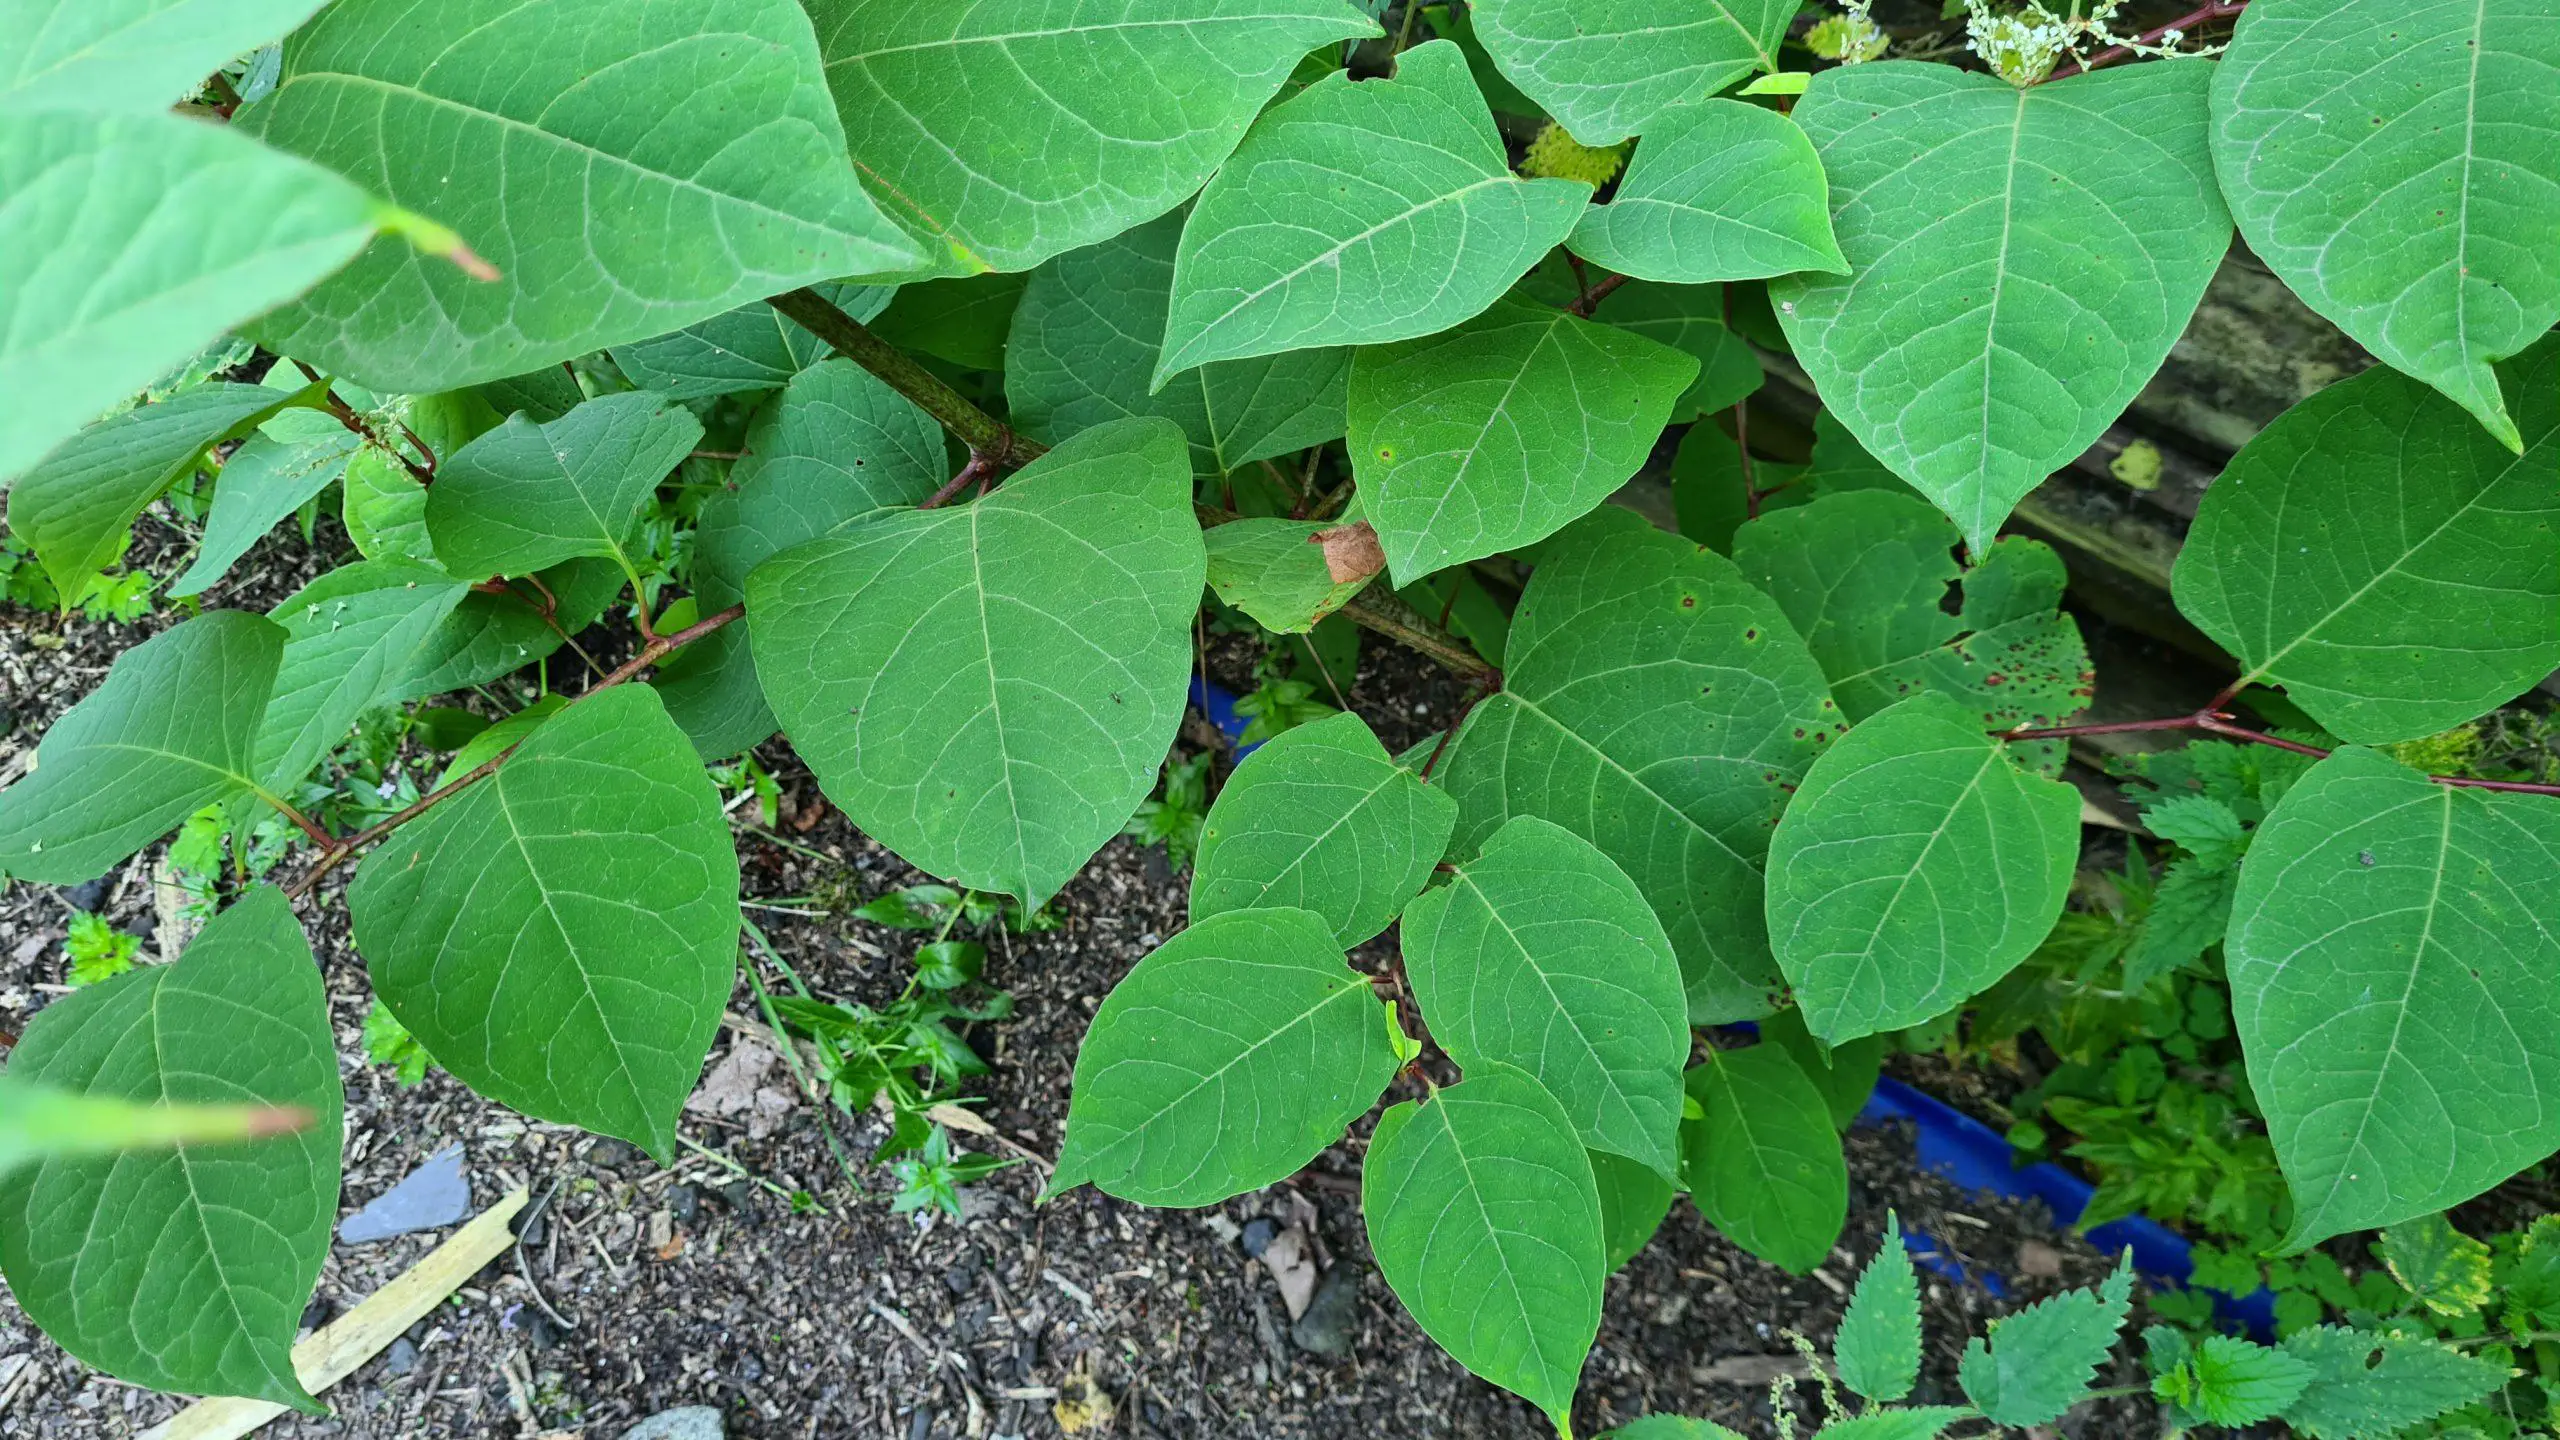 Japanese knotweed leaves create such coverage to present a problem for native plants